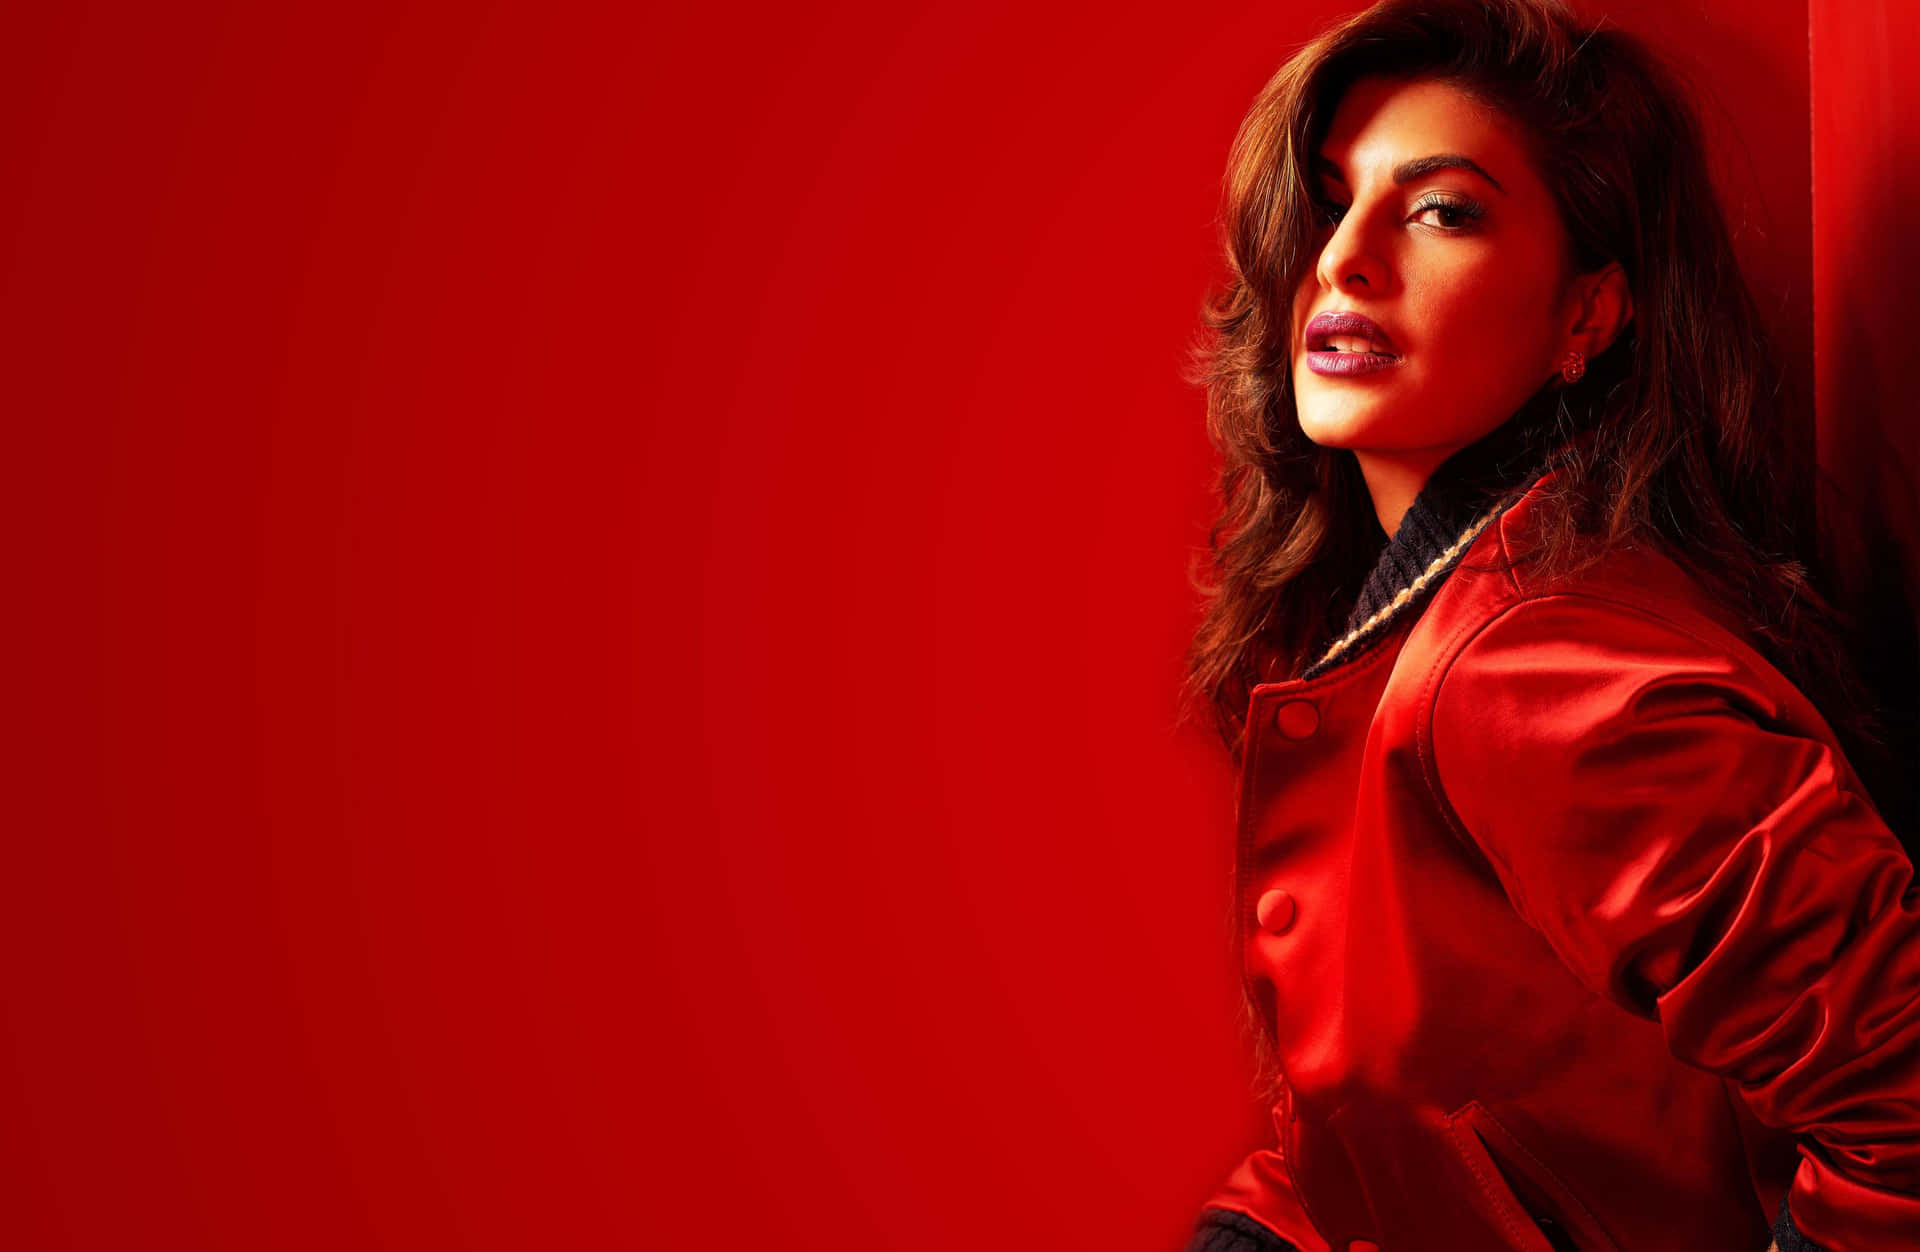 "Jacqueline Fernandez is a beautiful symbol of poise, grace and glamour."